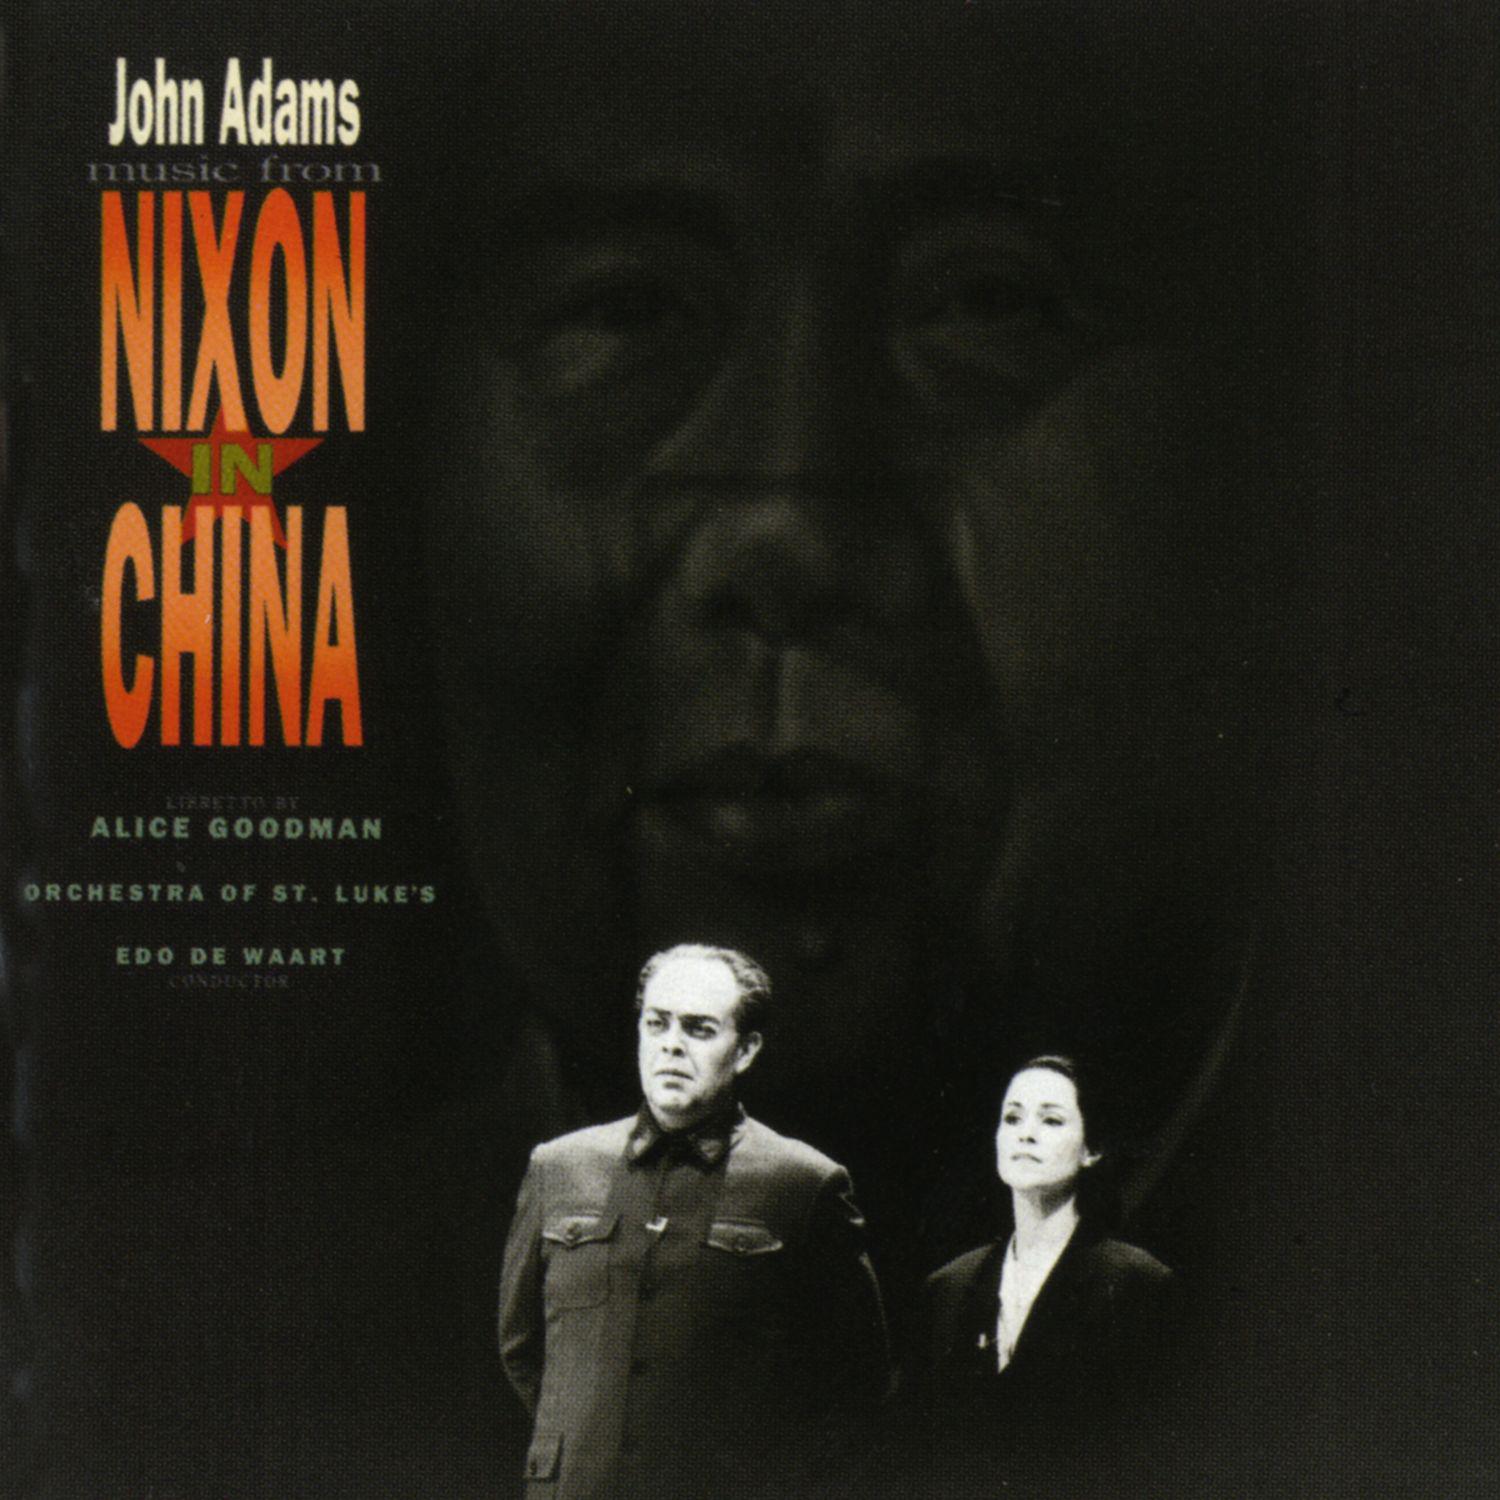 Nixon in China, Act II, Scene 2:"Whip Her to Death!"